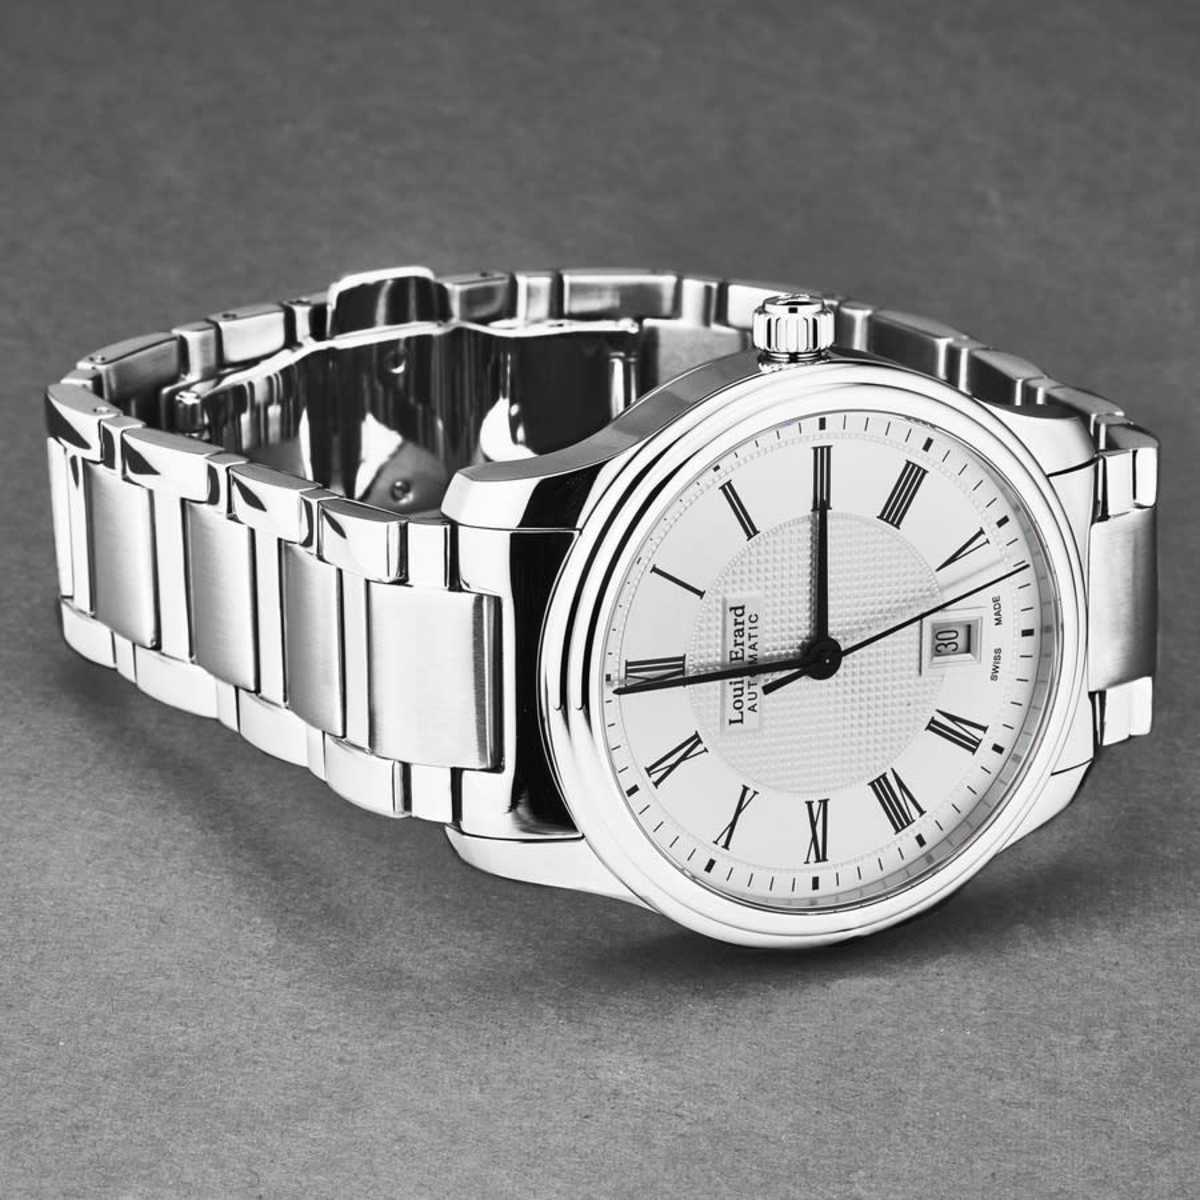 Dropship Louis Erard Men's 'Heritage' Silver Dial Silver Stainless Steel  Bracelet Automatic Watch 72288AA31.BMA88 to Sell Online at a Lower Price